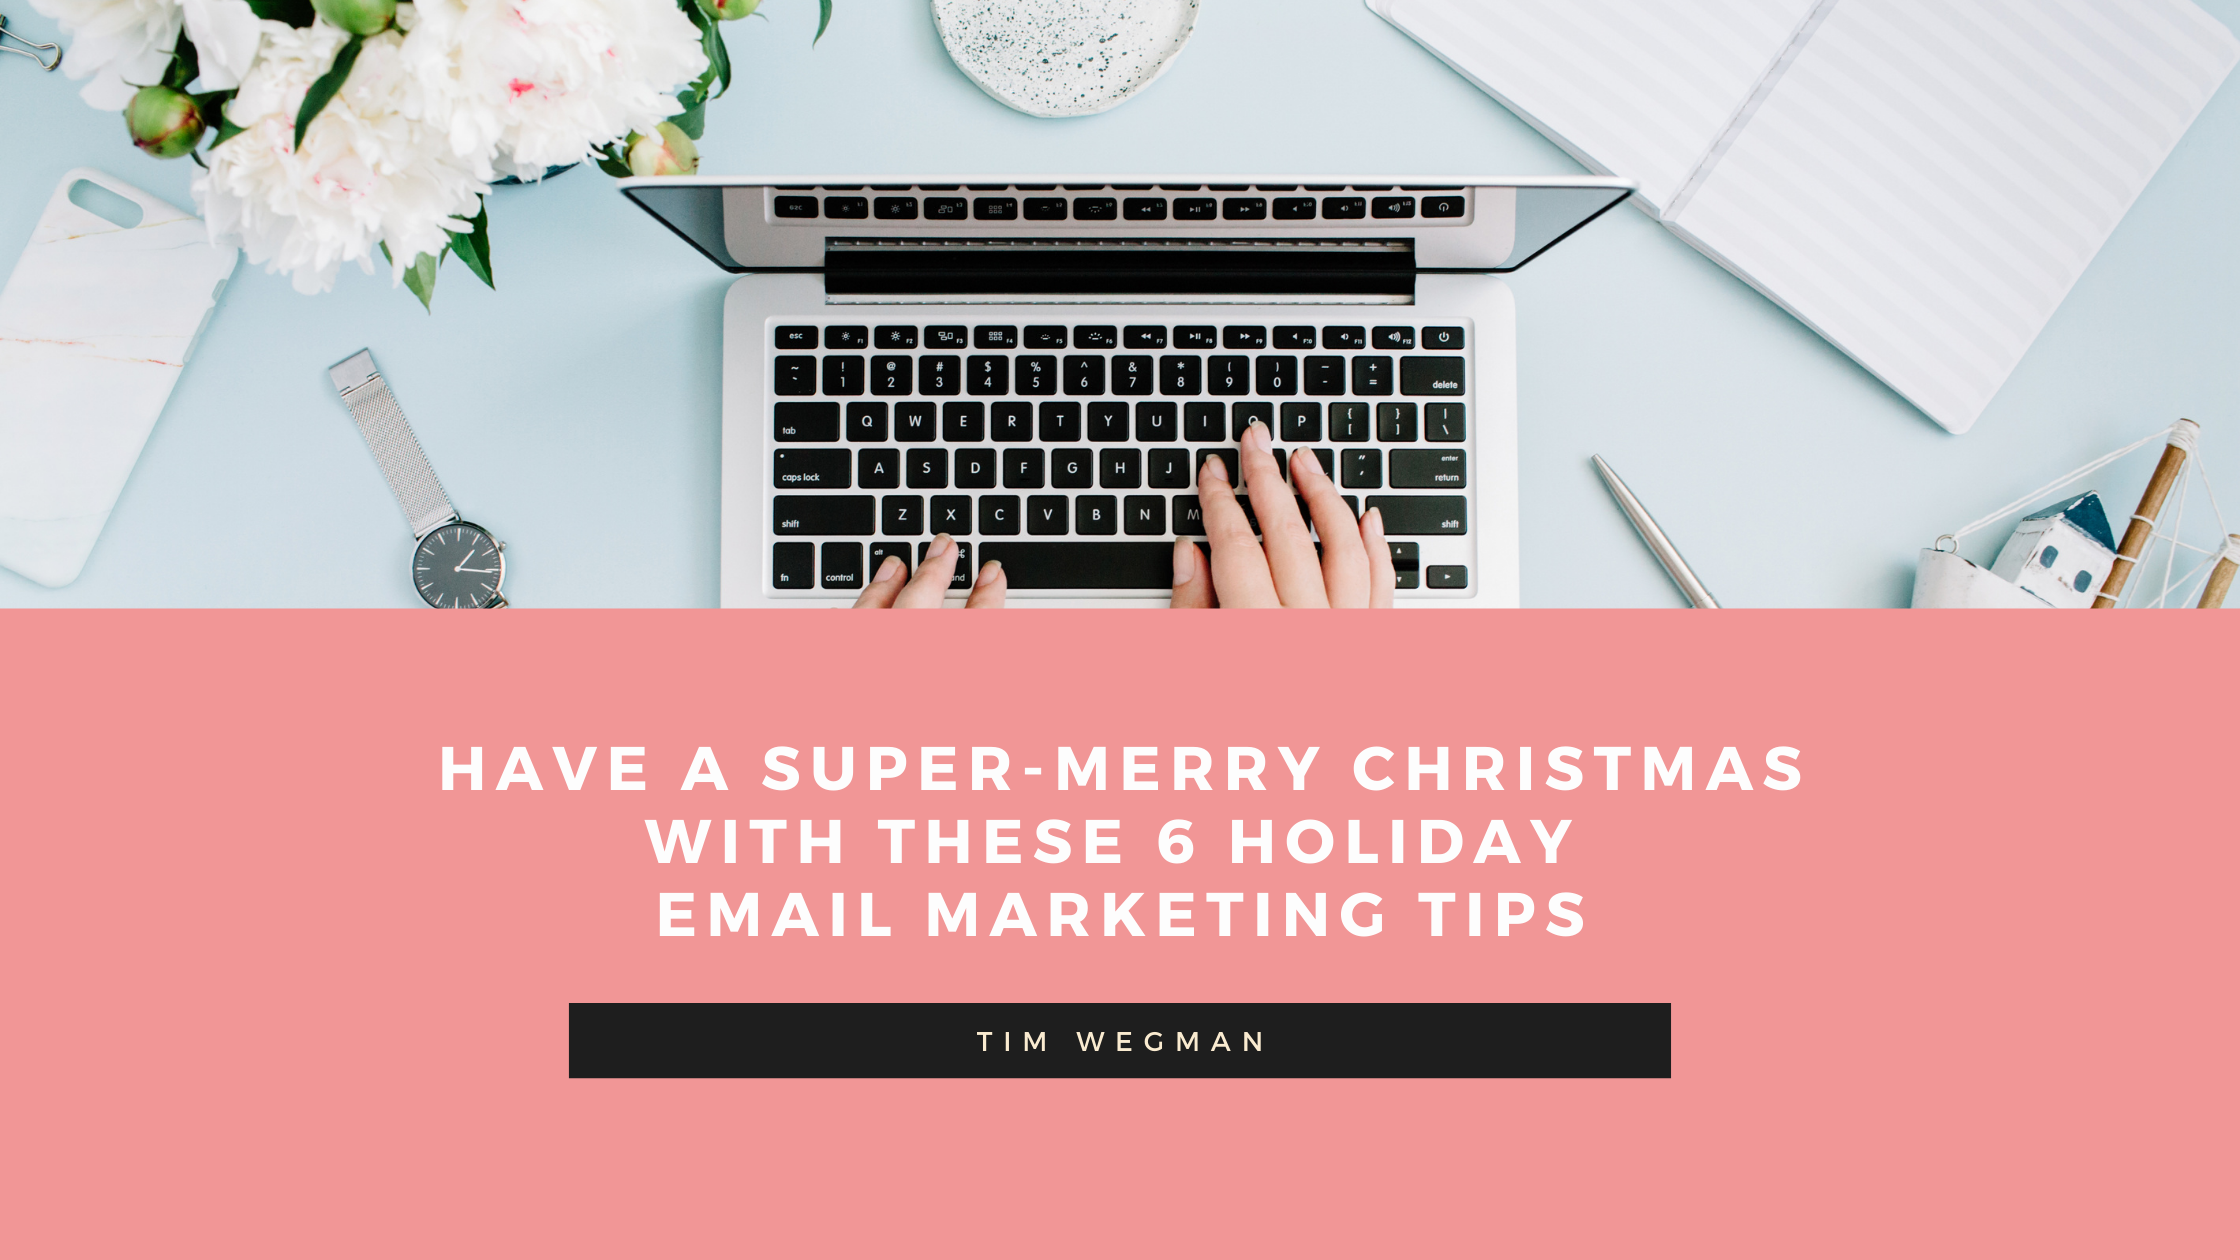 Email marketing is an old yet effective digital marketing strategy for every business. Improve the ROI by efficiently using it.